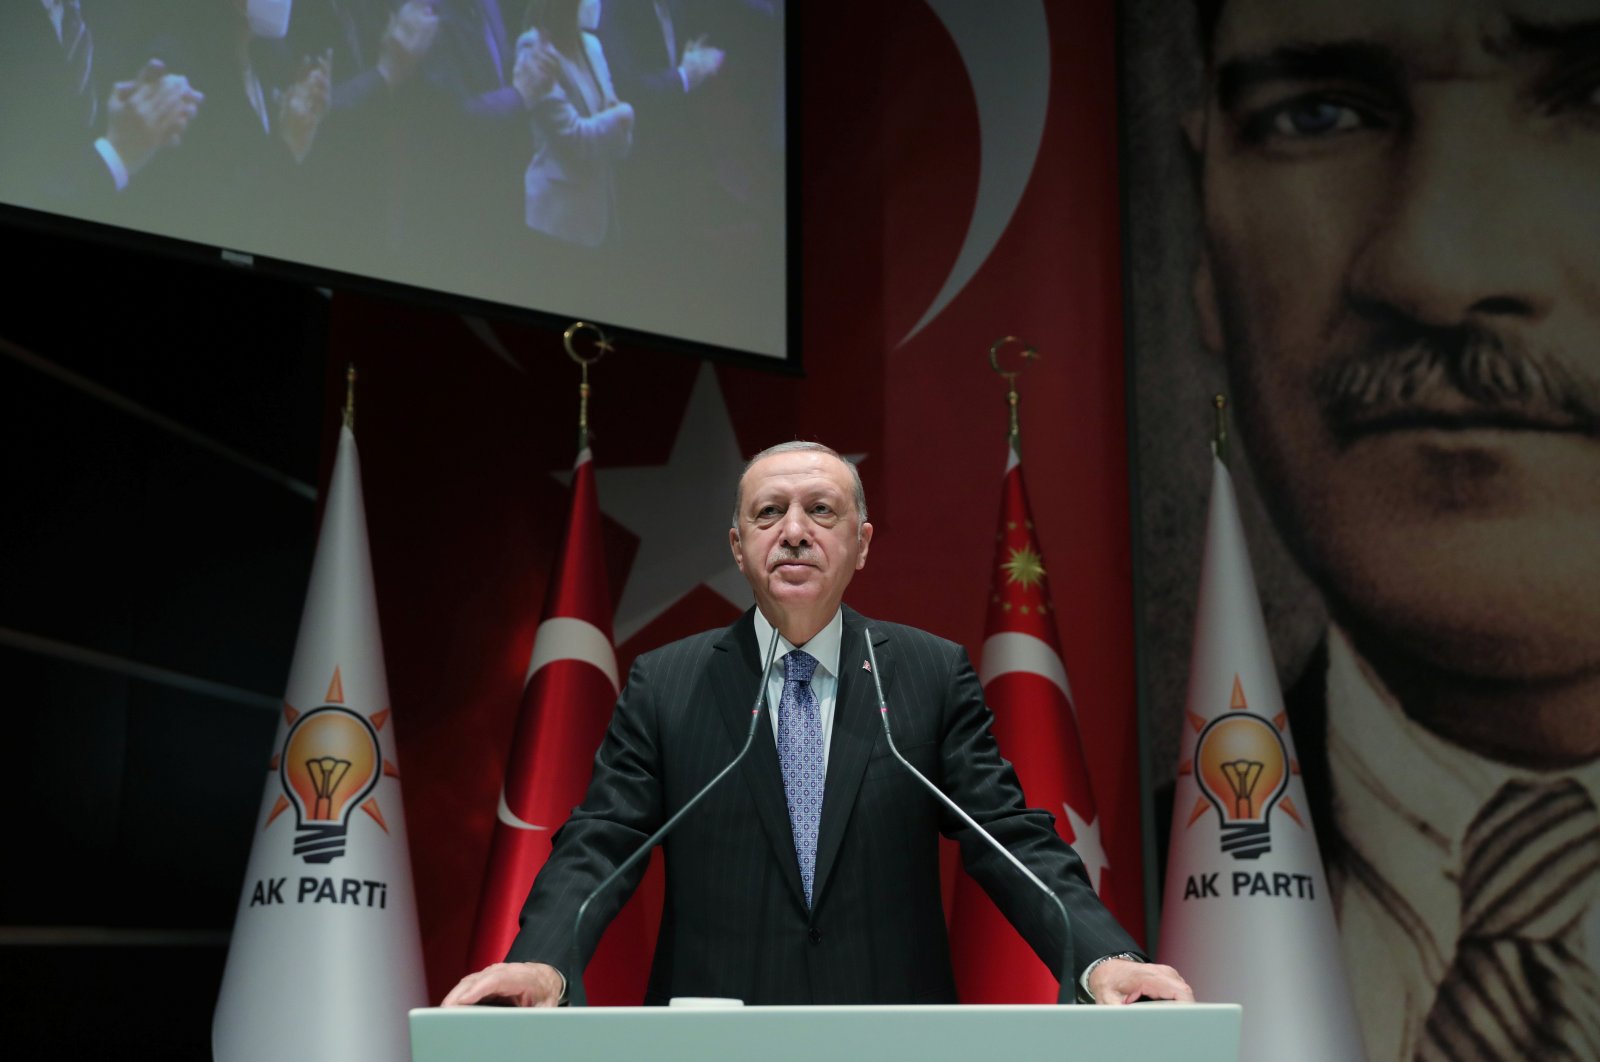 President Recep Tayyip Erdoğan addresses members of his ruling Justice and Development Party (AK Party) during a meeting at the party headquarters in Ankara, Turkey, Nov. 23, 2021. (Reuters Photo)